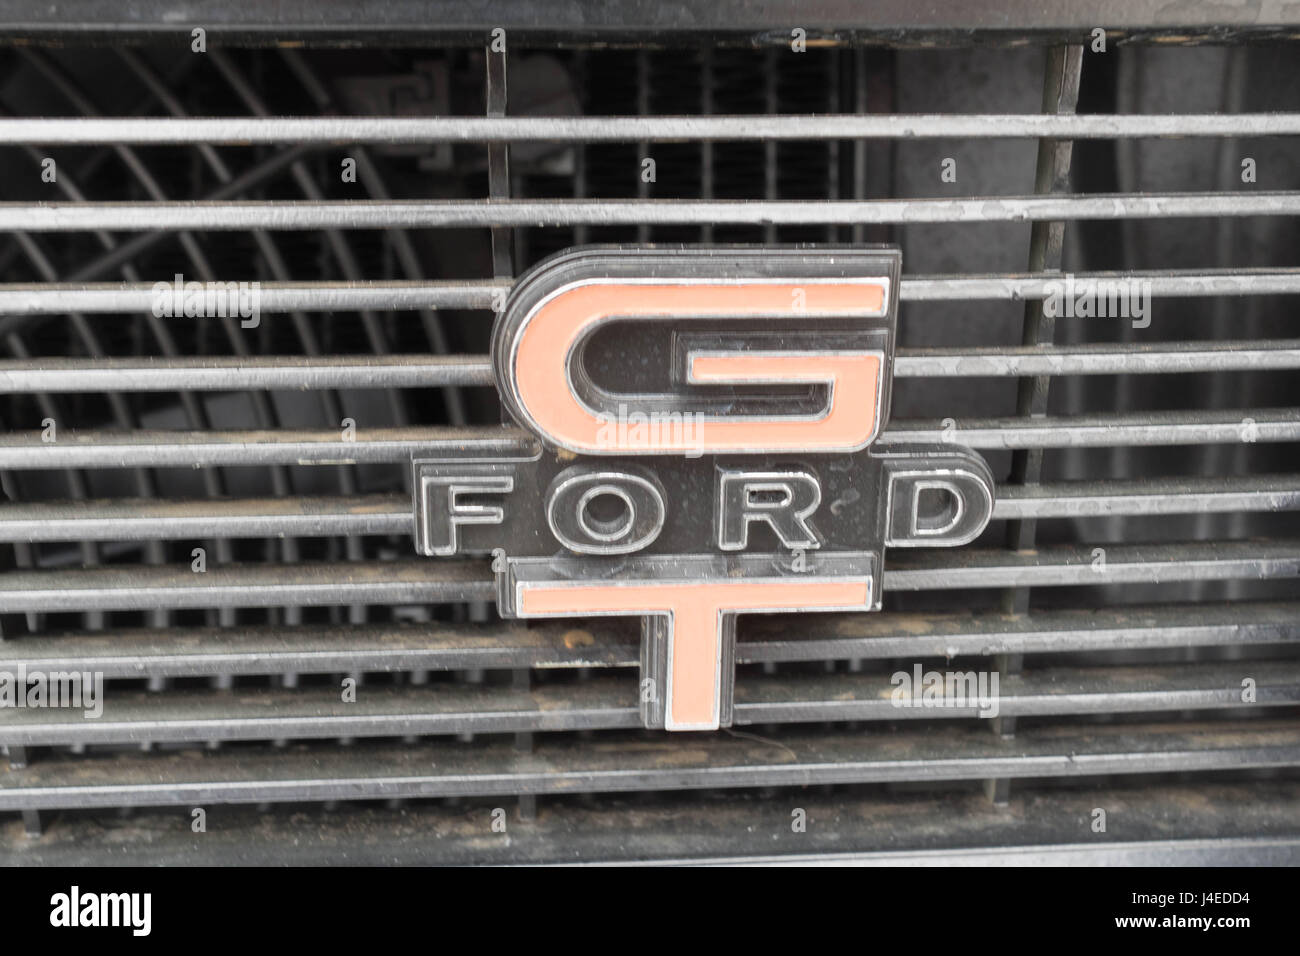 Torrance, USA - May 5 2017: Ford Falcon 351 GT emblem on display during 12th Annual Edelbrock Car Show. Stock Photo